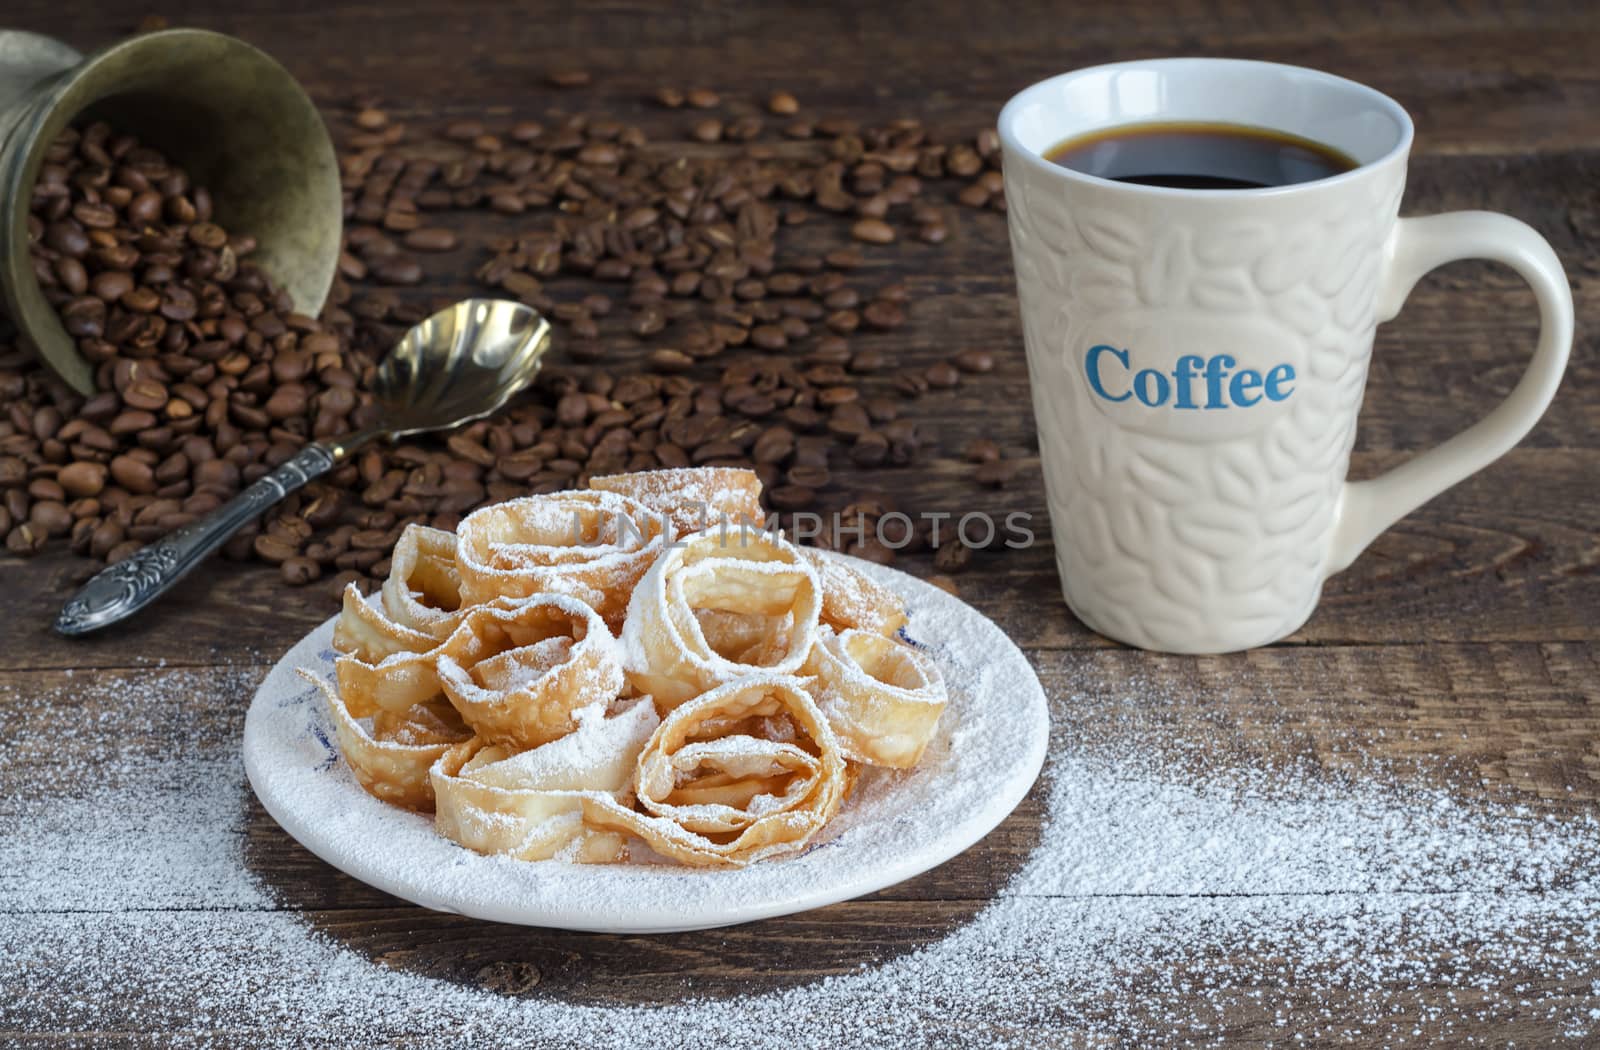 Crumbly cookies in powdered sugar and a Cup of coffee. Refried beans and spoon on a wooden surface.